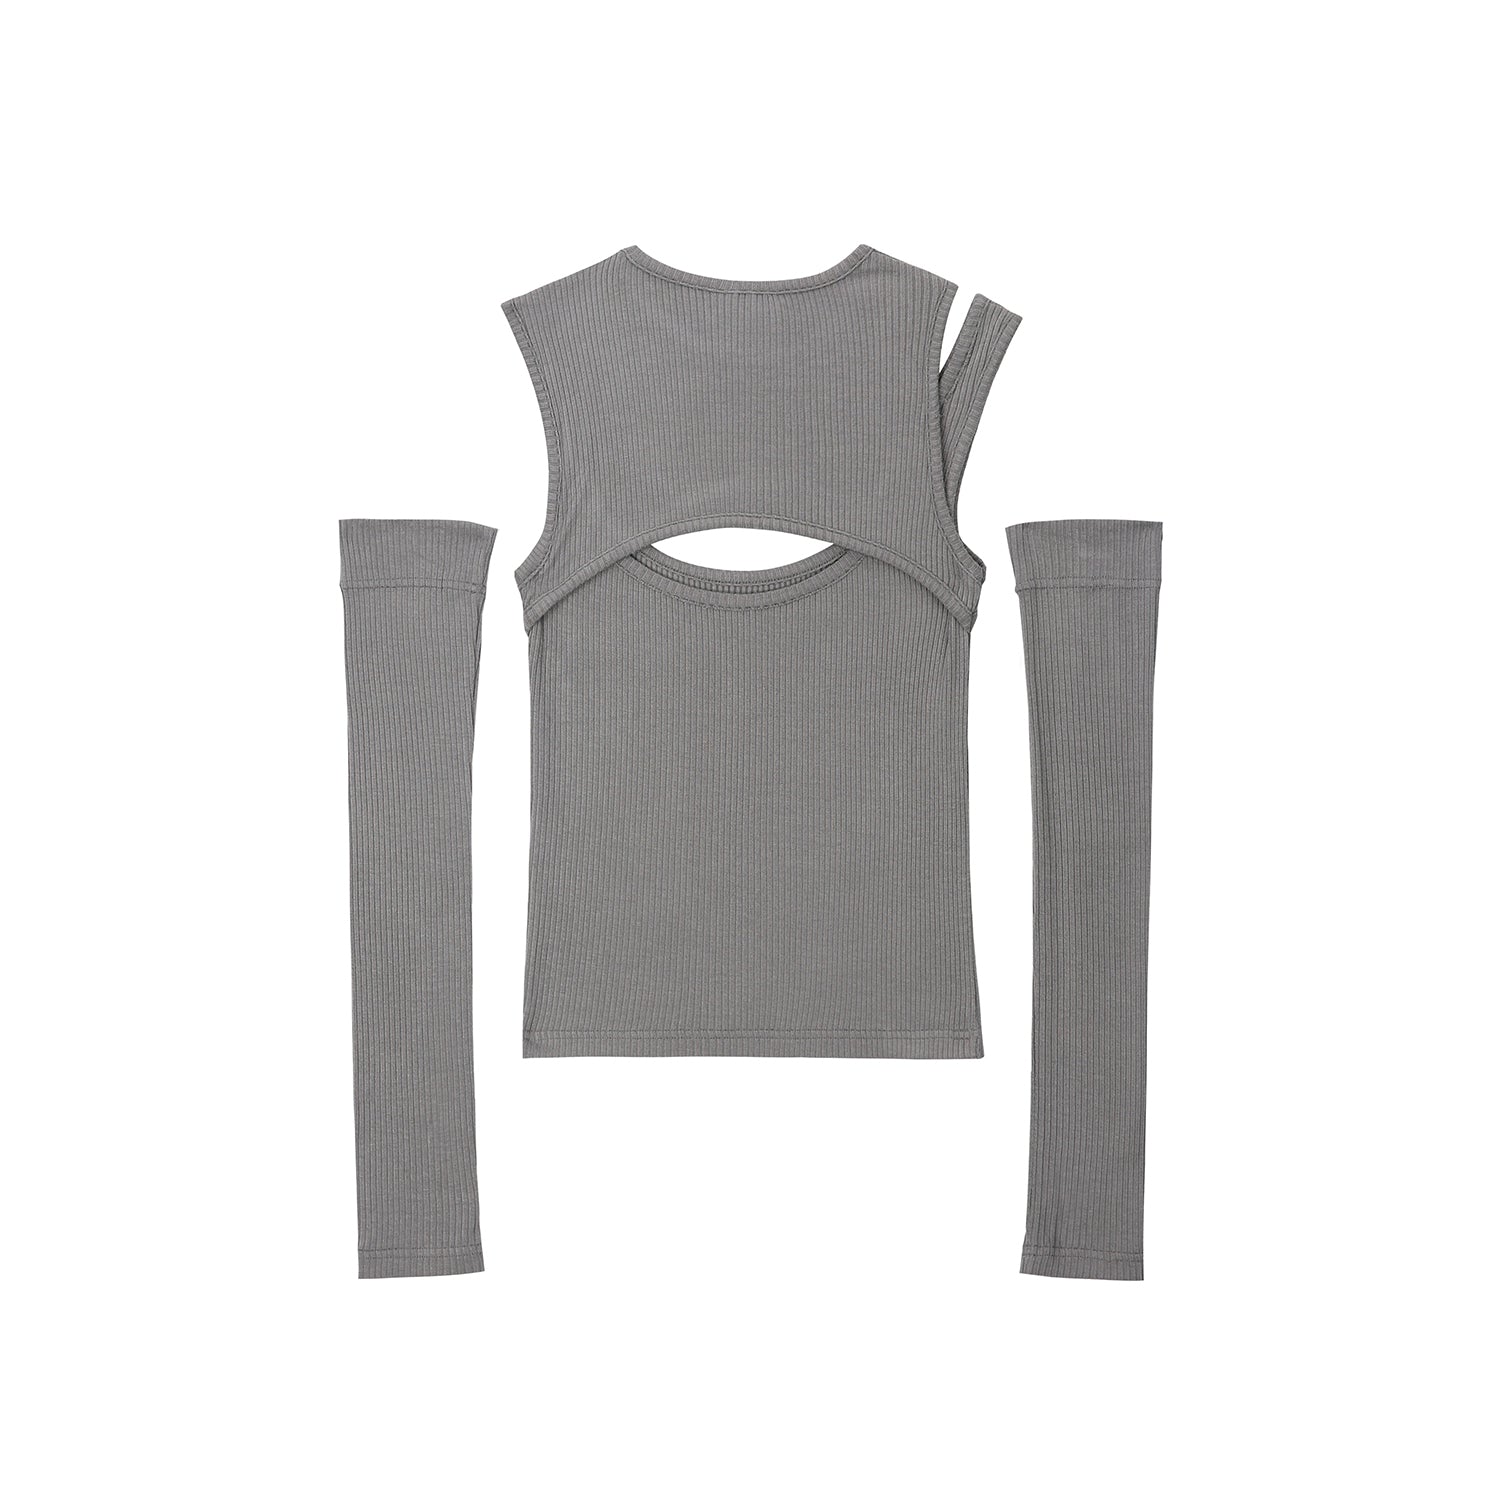 0 5 cut out warmer top - GREY